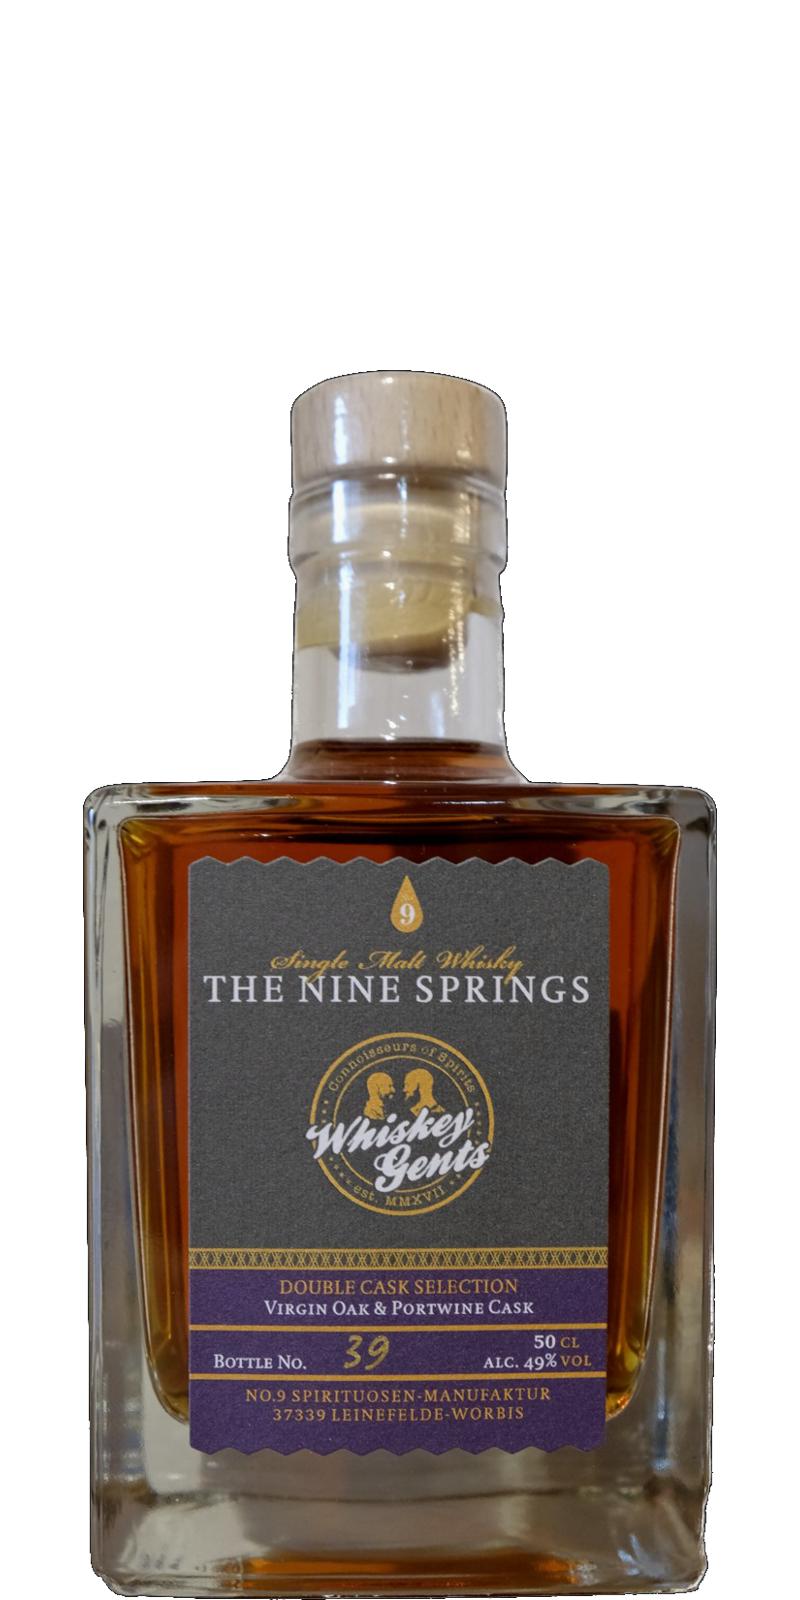 The Nine Springs Double Cask Selection Whiskey Gents 49% 500ml